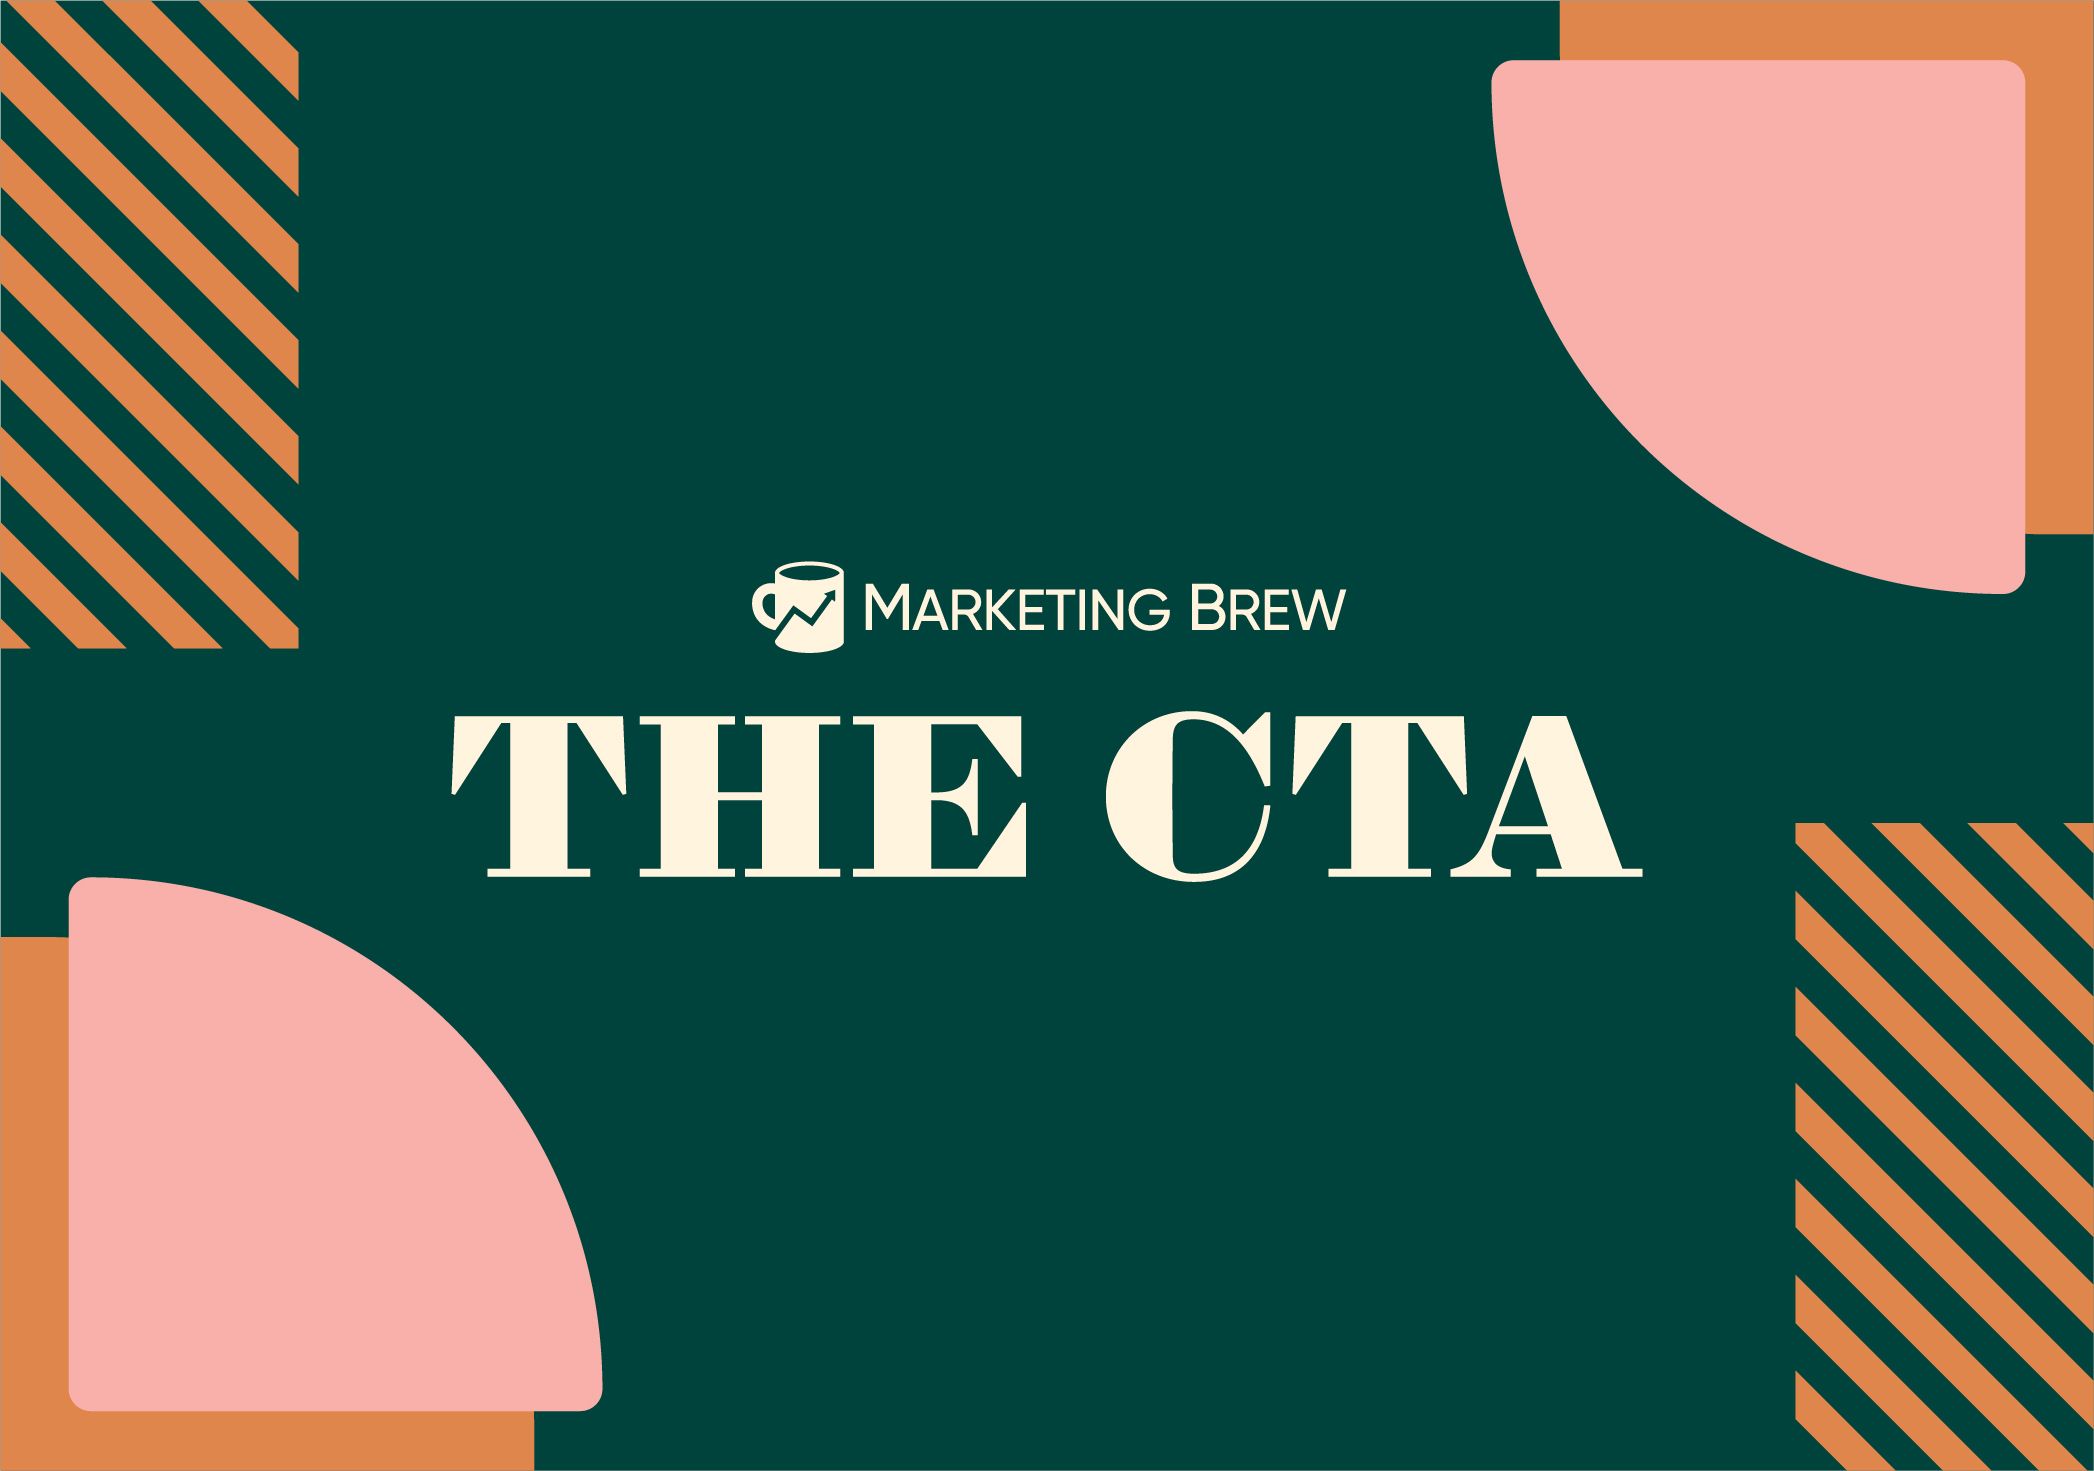 An image promoting The CTA, Marketing Brew's monthly event series